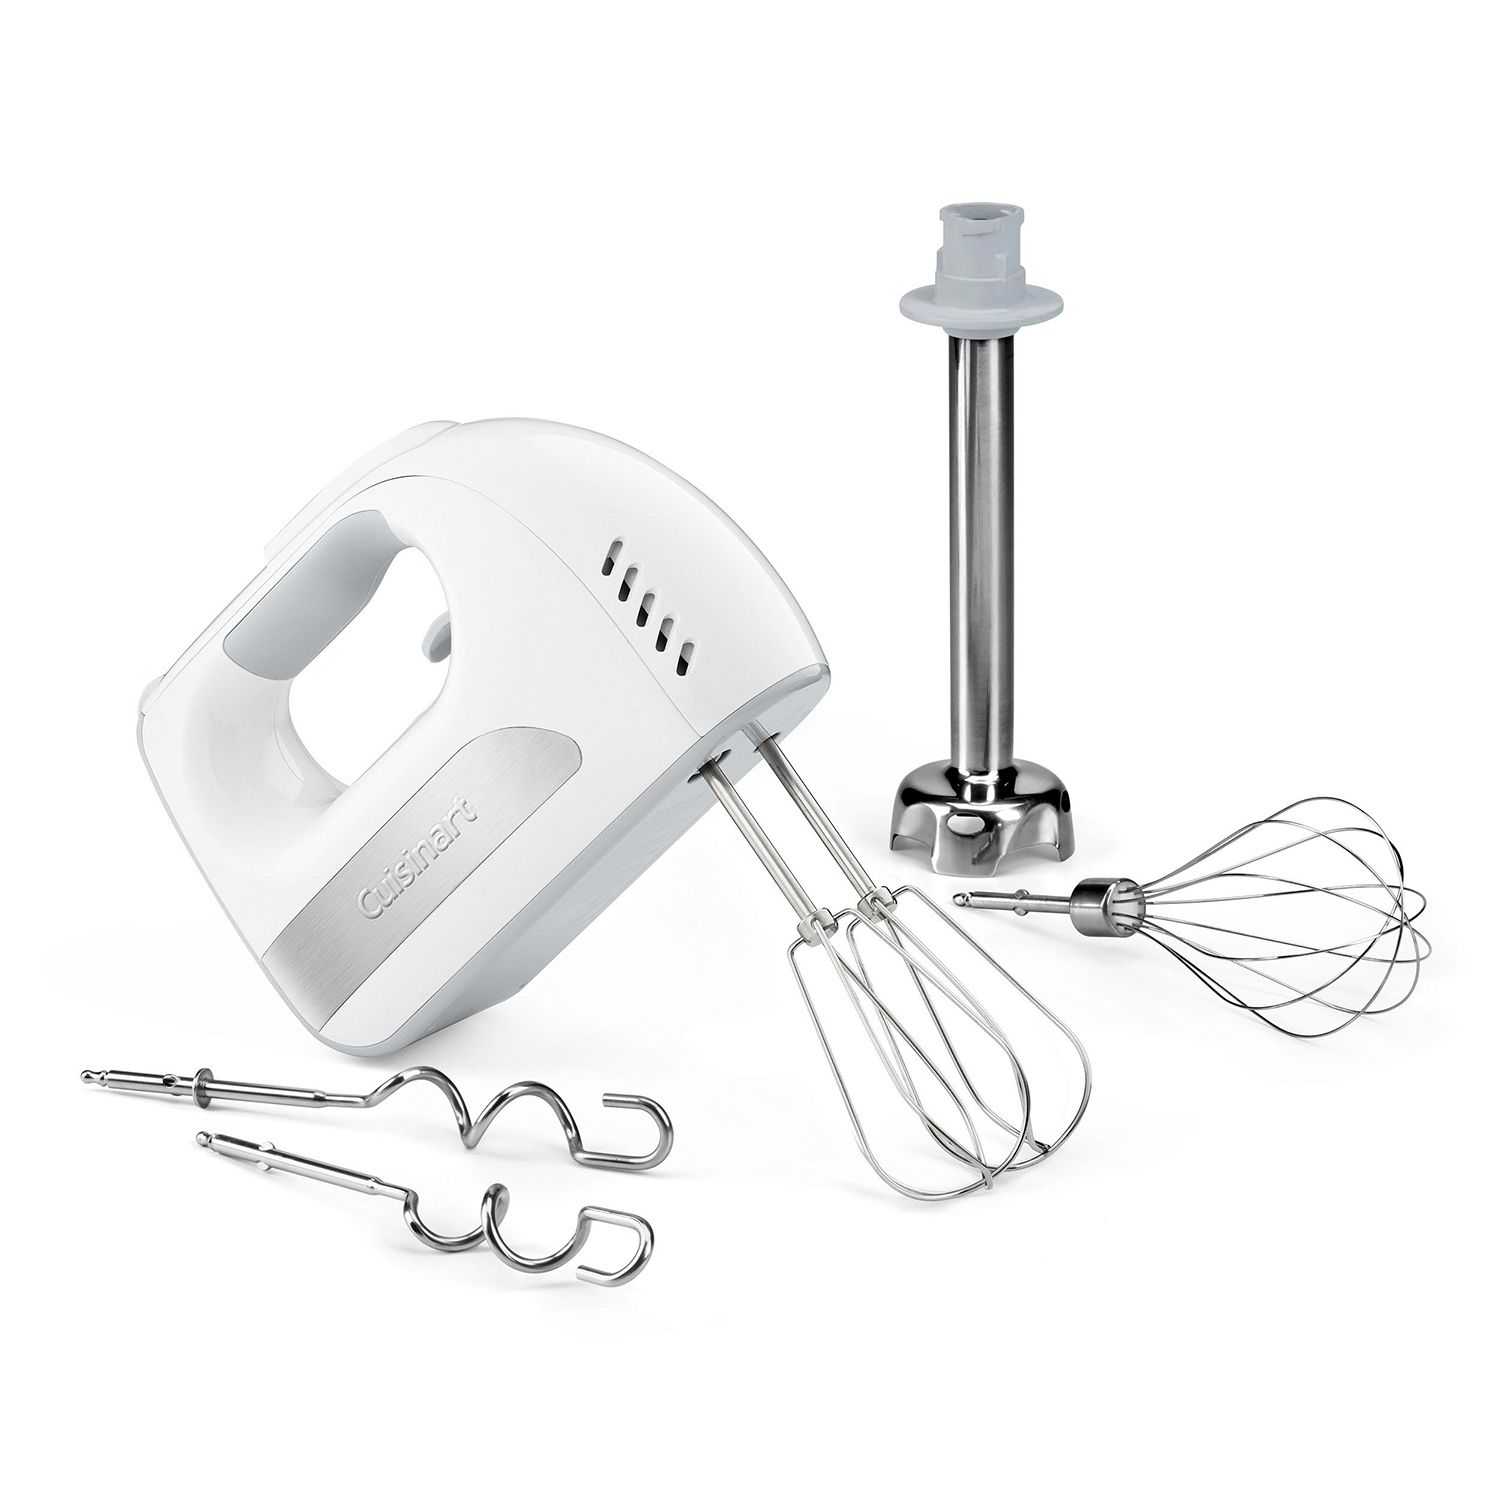 KitchenAid Cordless Variable Speed Hand Blender with Chopper and Whisk  Attachment - KHBBV83 & 6 Speed Hand Mixer with Flex Edge Beaters - KHM6118